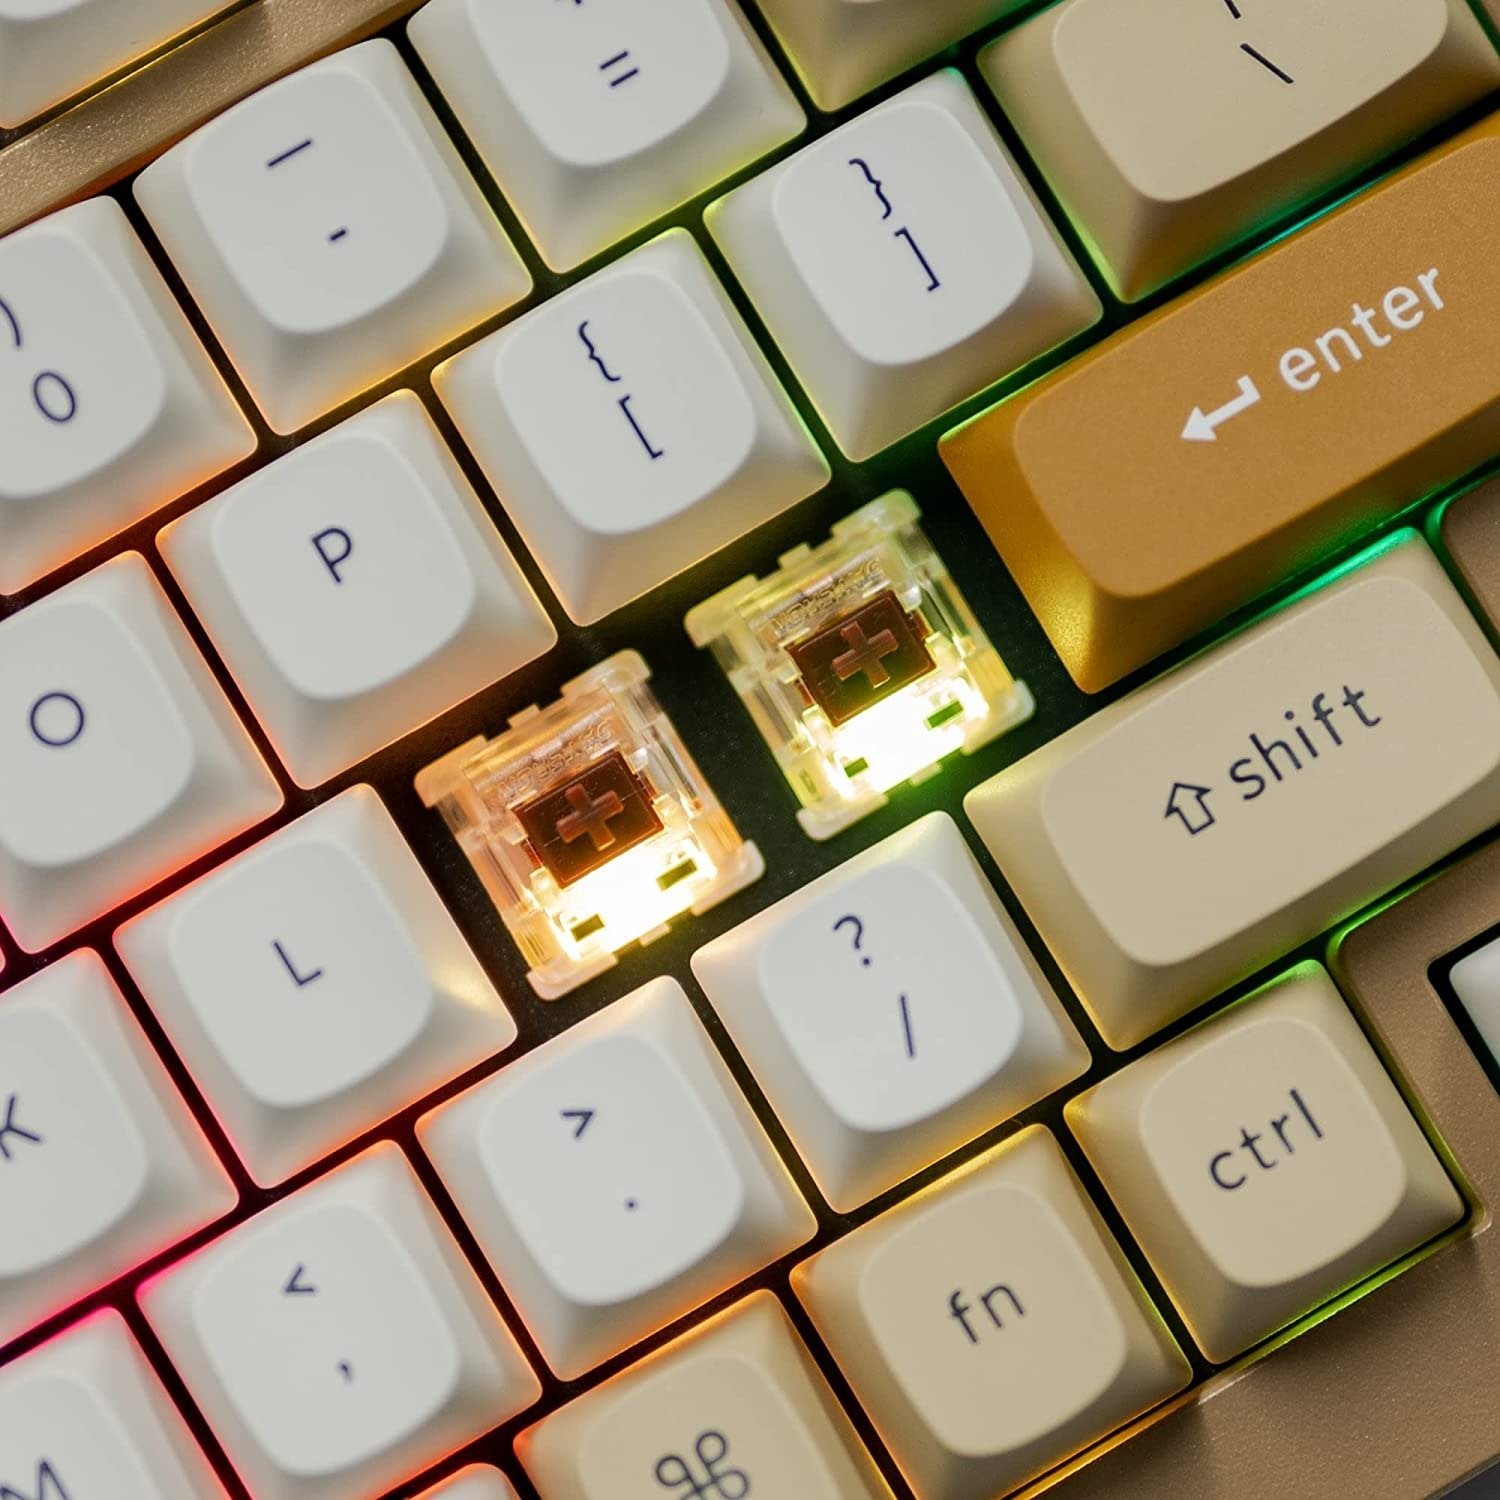 Gaming-Tastatur Keychron Q1 Swappable RGB Backlight Red Switch Knob Version - Champagne Gold ...